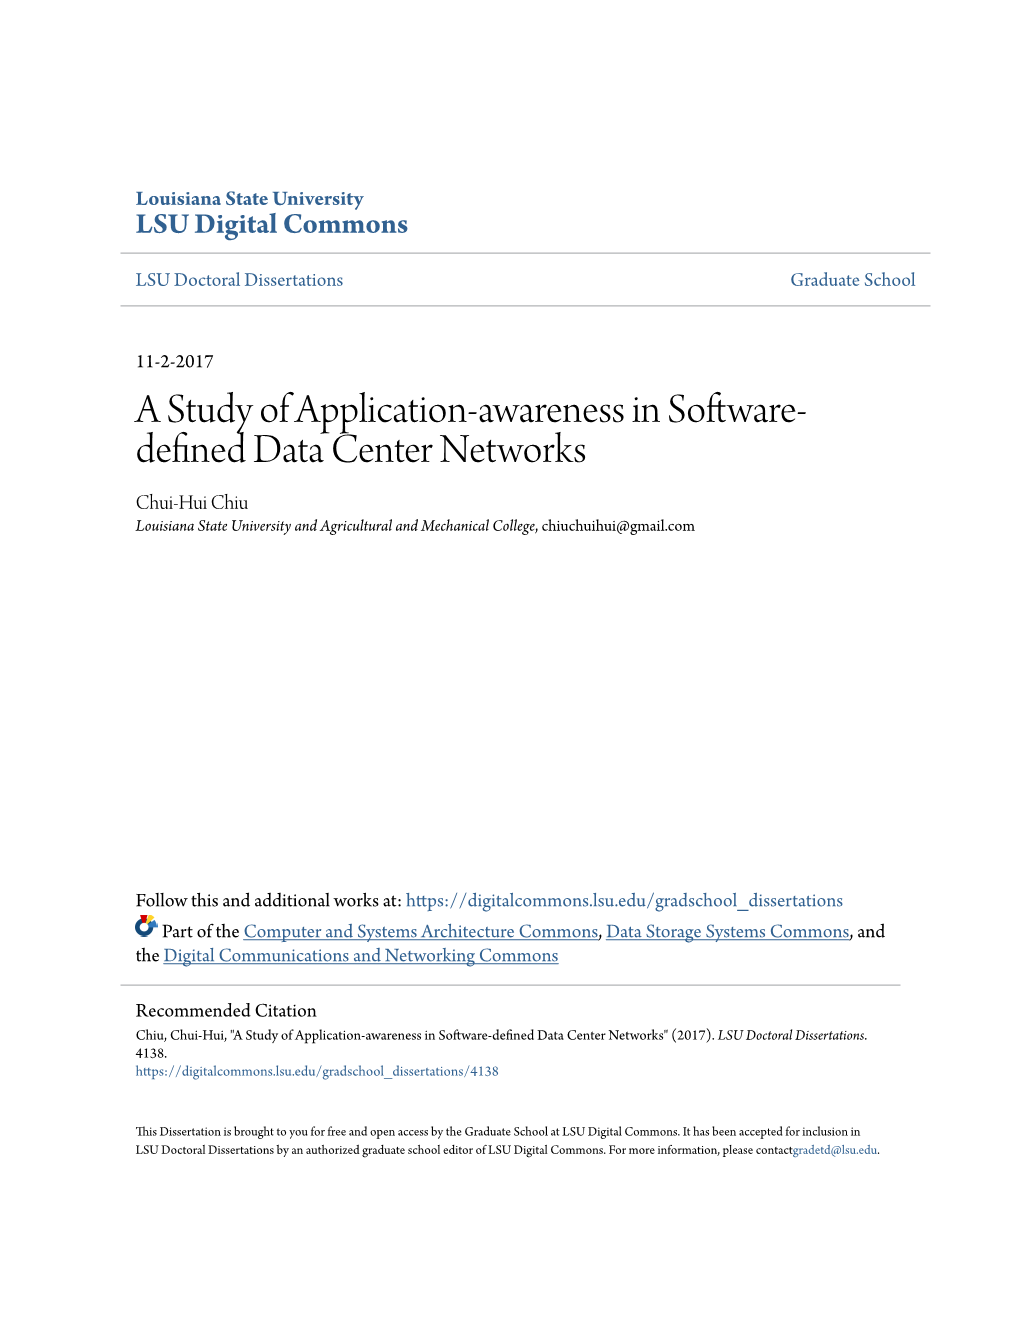 A Study of Application-Awareness in Software-Defined Data Center Networks" (2017)